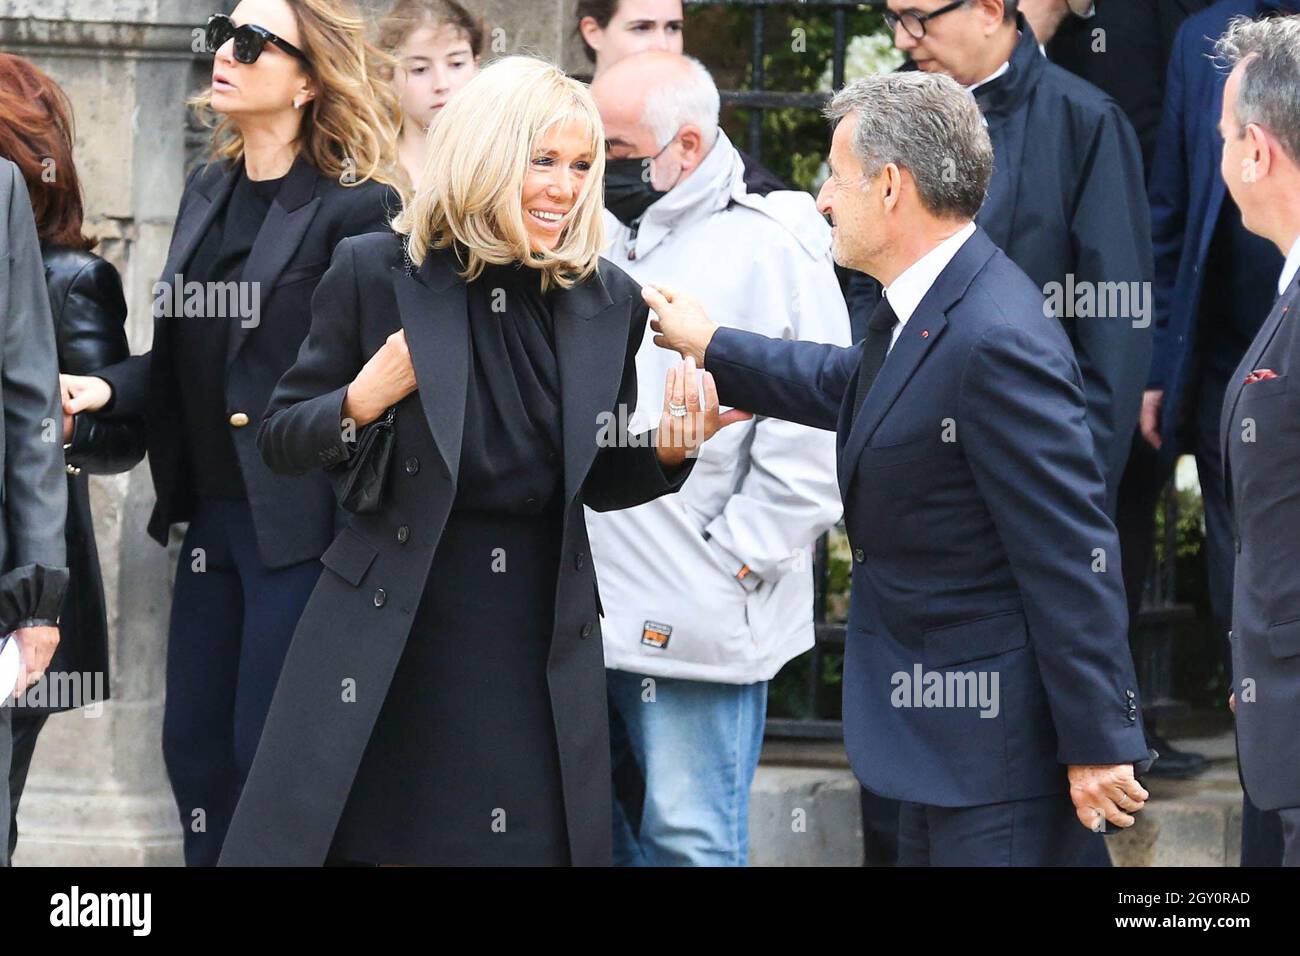 Brigitte Macron with former French president Nicolas Sarkozy during a  tribute mass for French tycoon Bernard Tapie at Saint Germain des Pres  church in Paris, France on October 6, 2021. The funeral